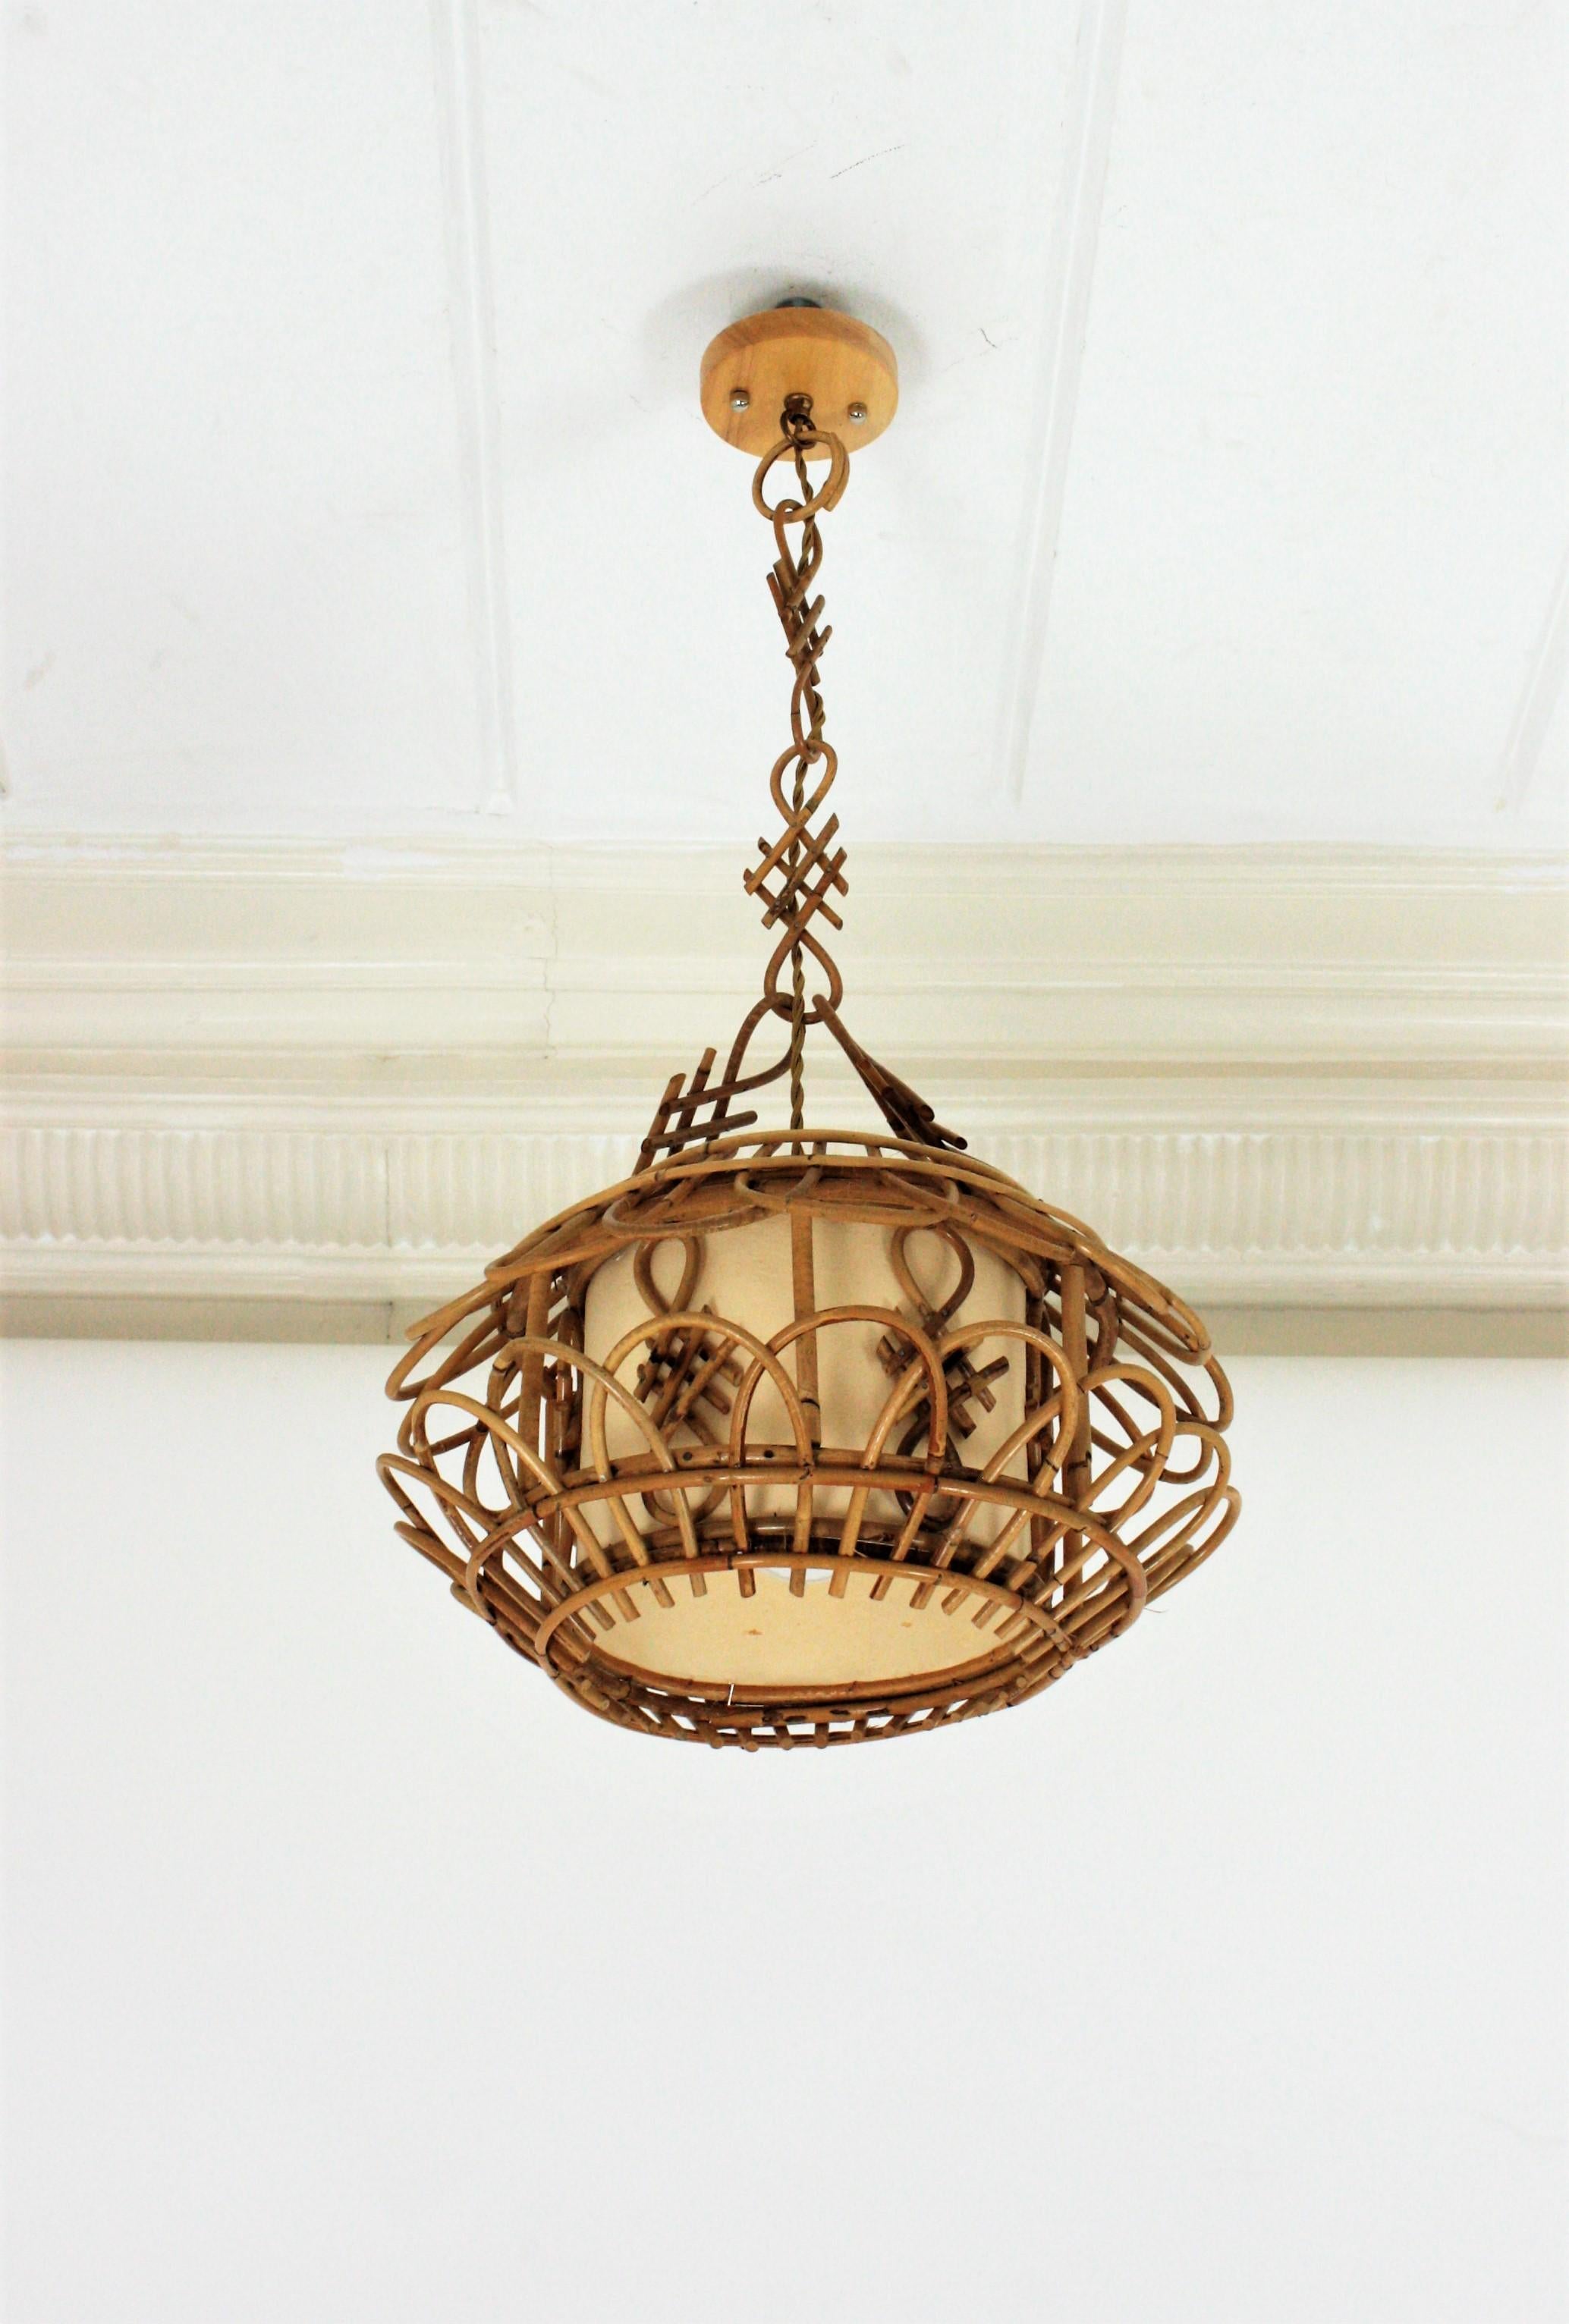 French Modernist Rattan Pagoda Pendant Lamp or Lantern with Chinoiserie Accents 1